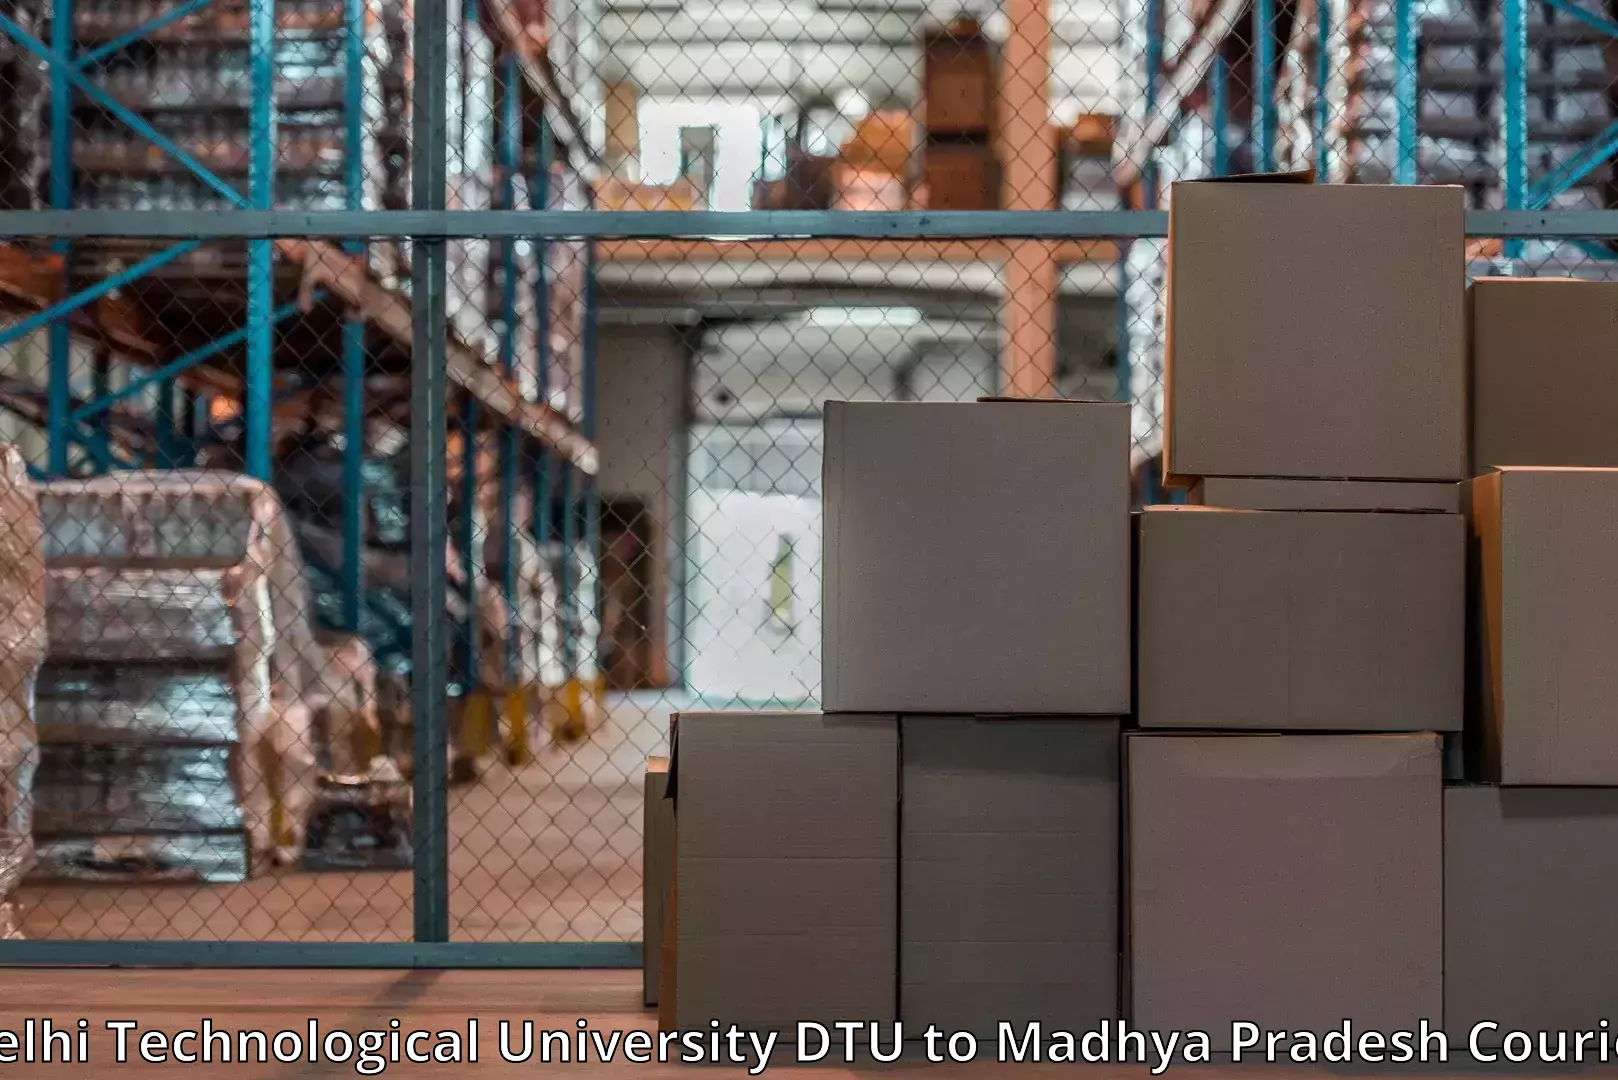 Trusted moving company Delhi Technological University DTU to Agar